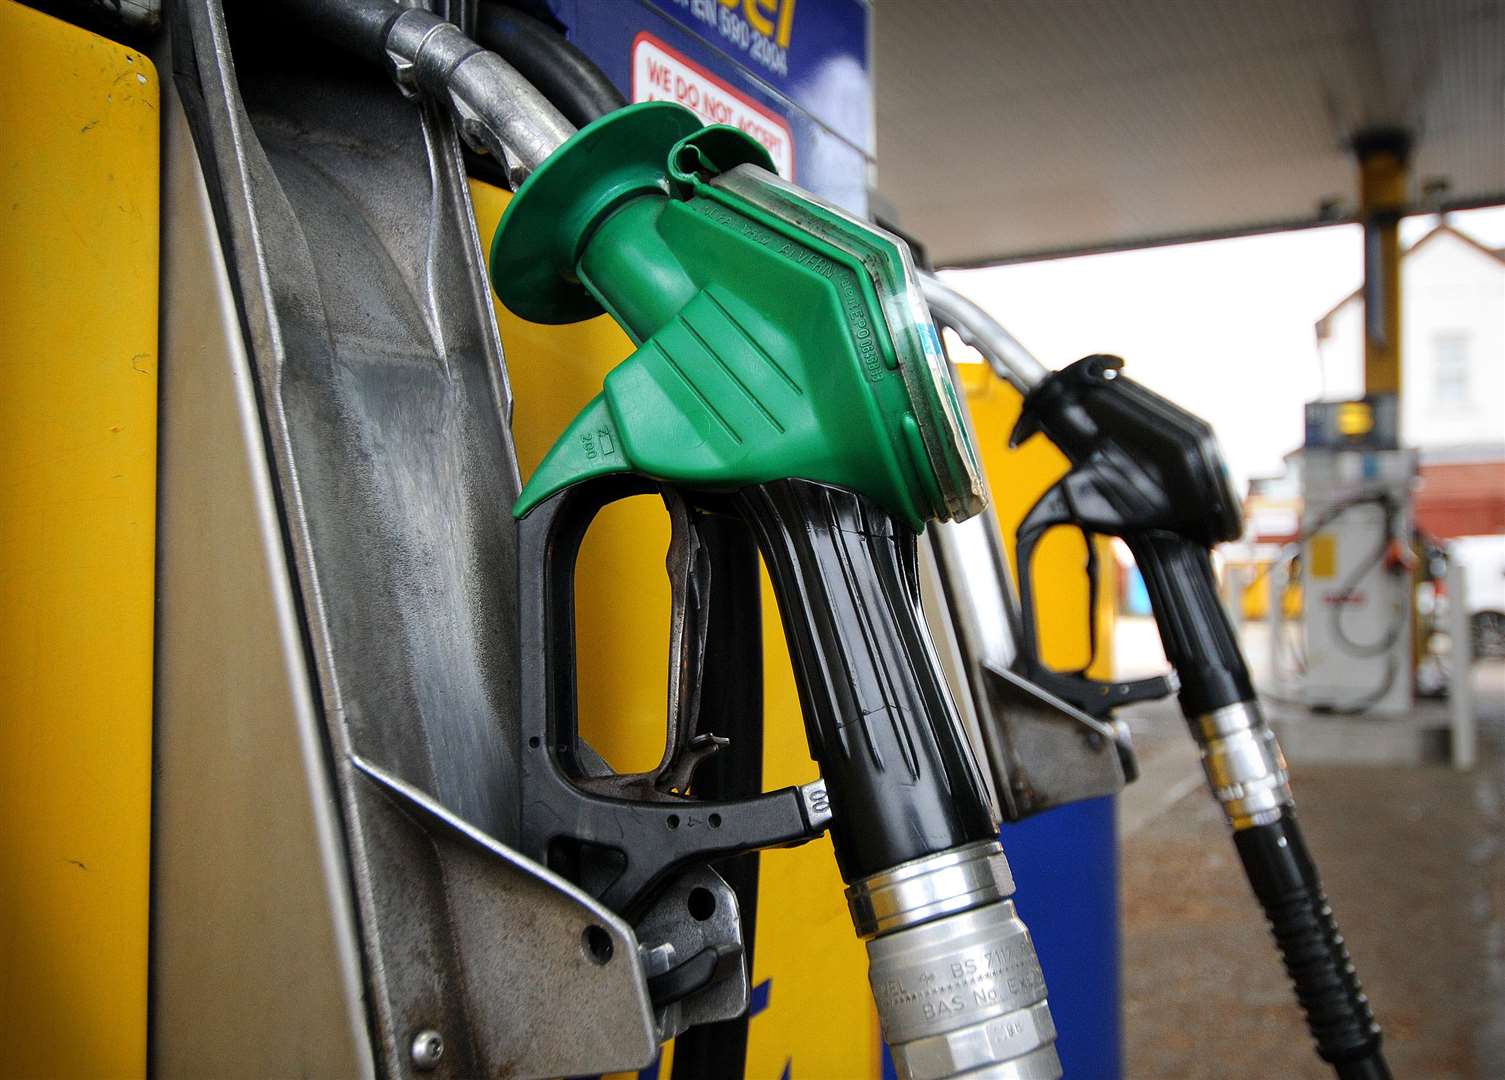 Fuel duty has been frozen for the eight consecutive year